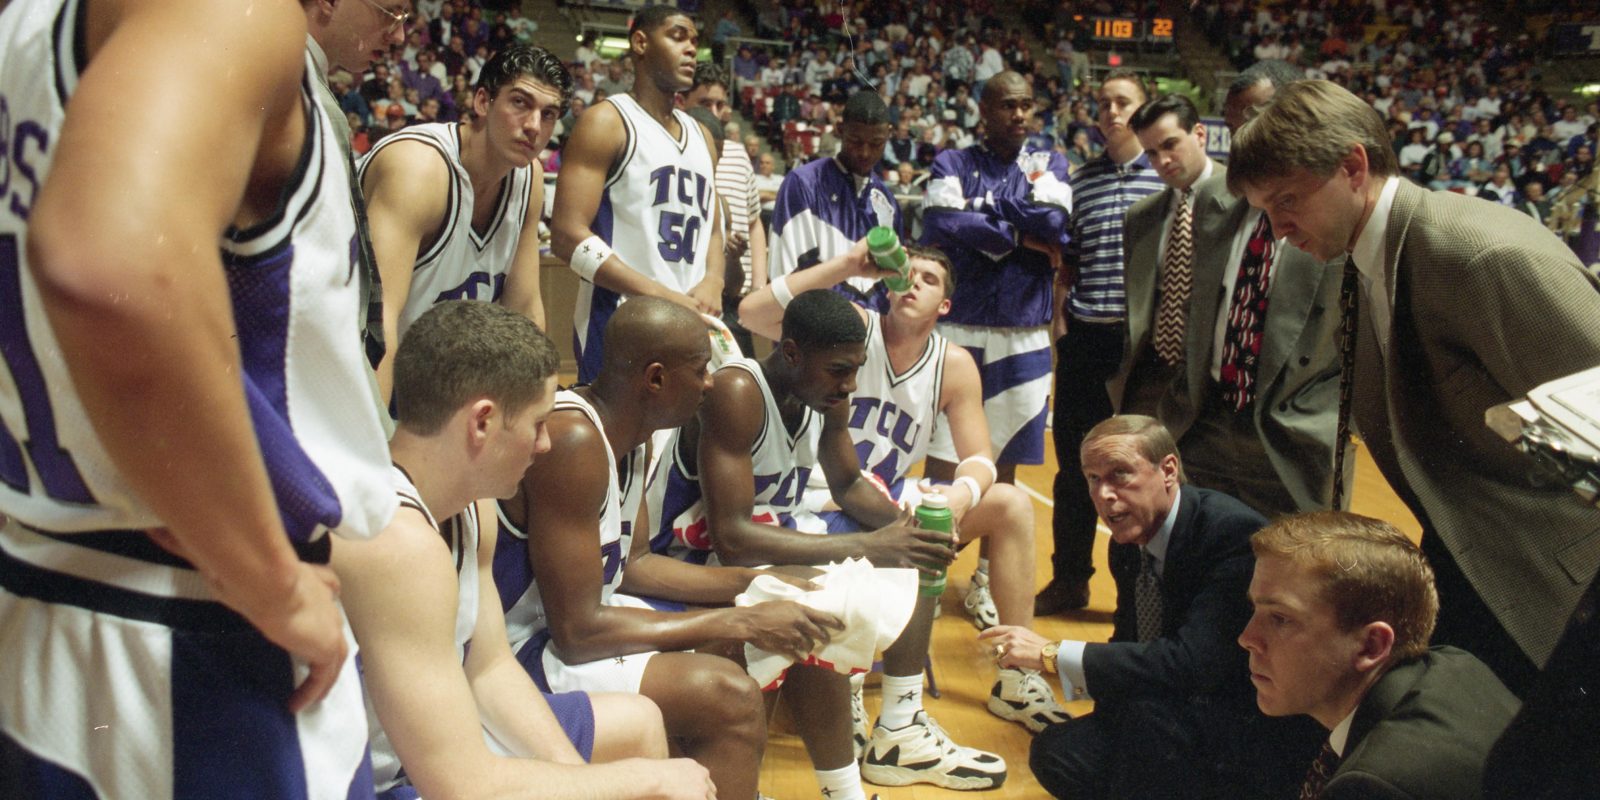 TCU basketball takes a time-out on the basketball court sideline to listen to coach Billy Tubbs.